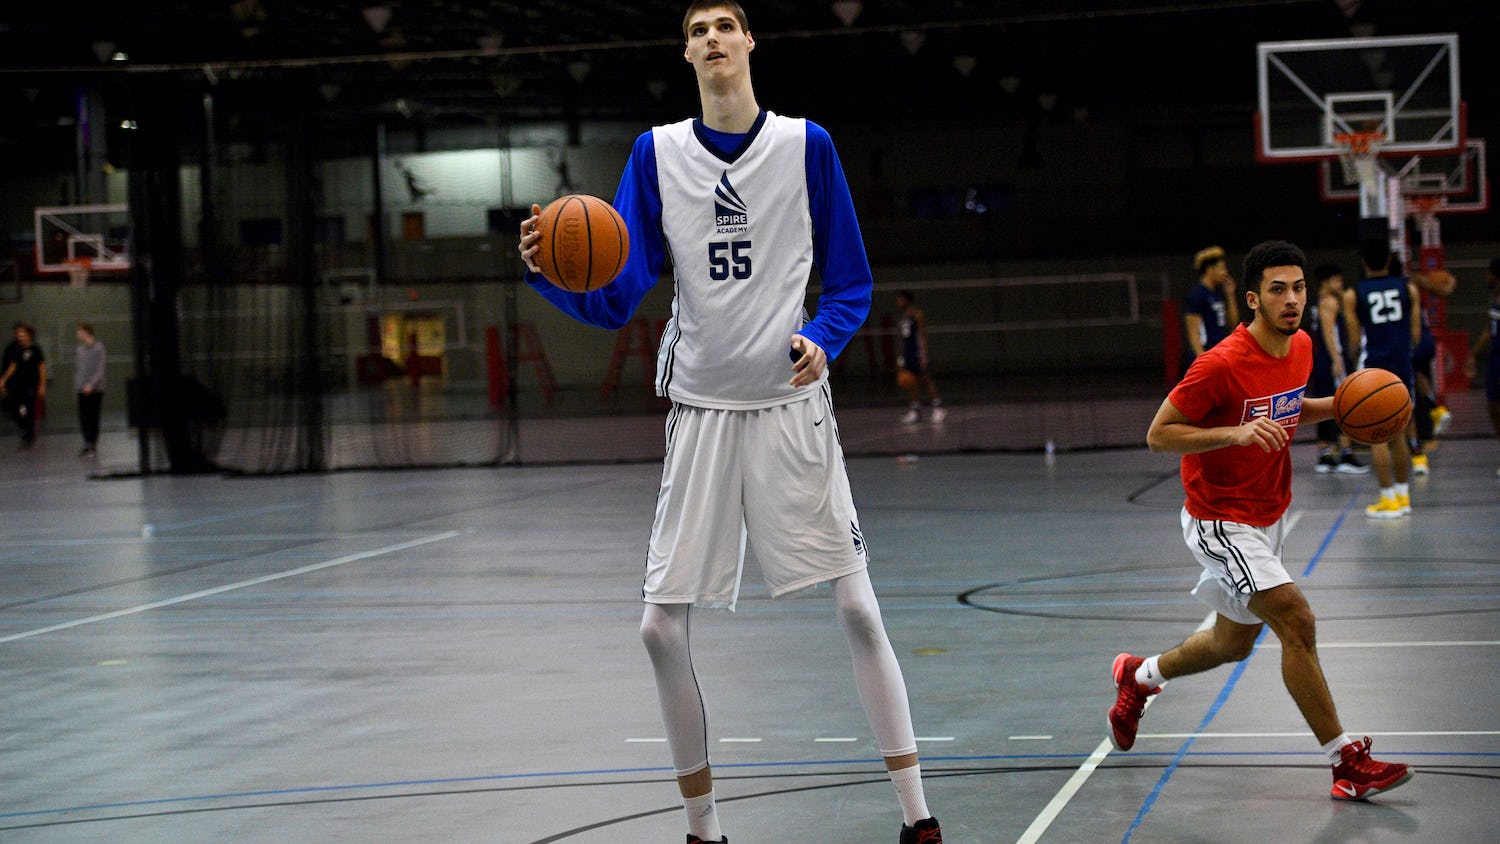 newsela-robert-bobroczky-is-7-feet-7-inches-and-can-dunk-without-trying